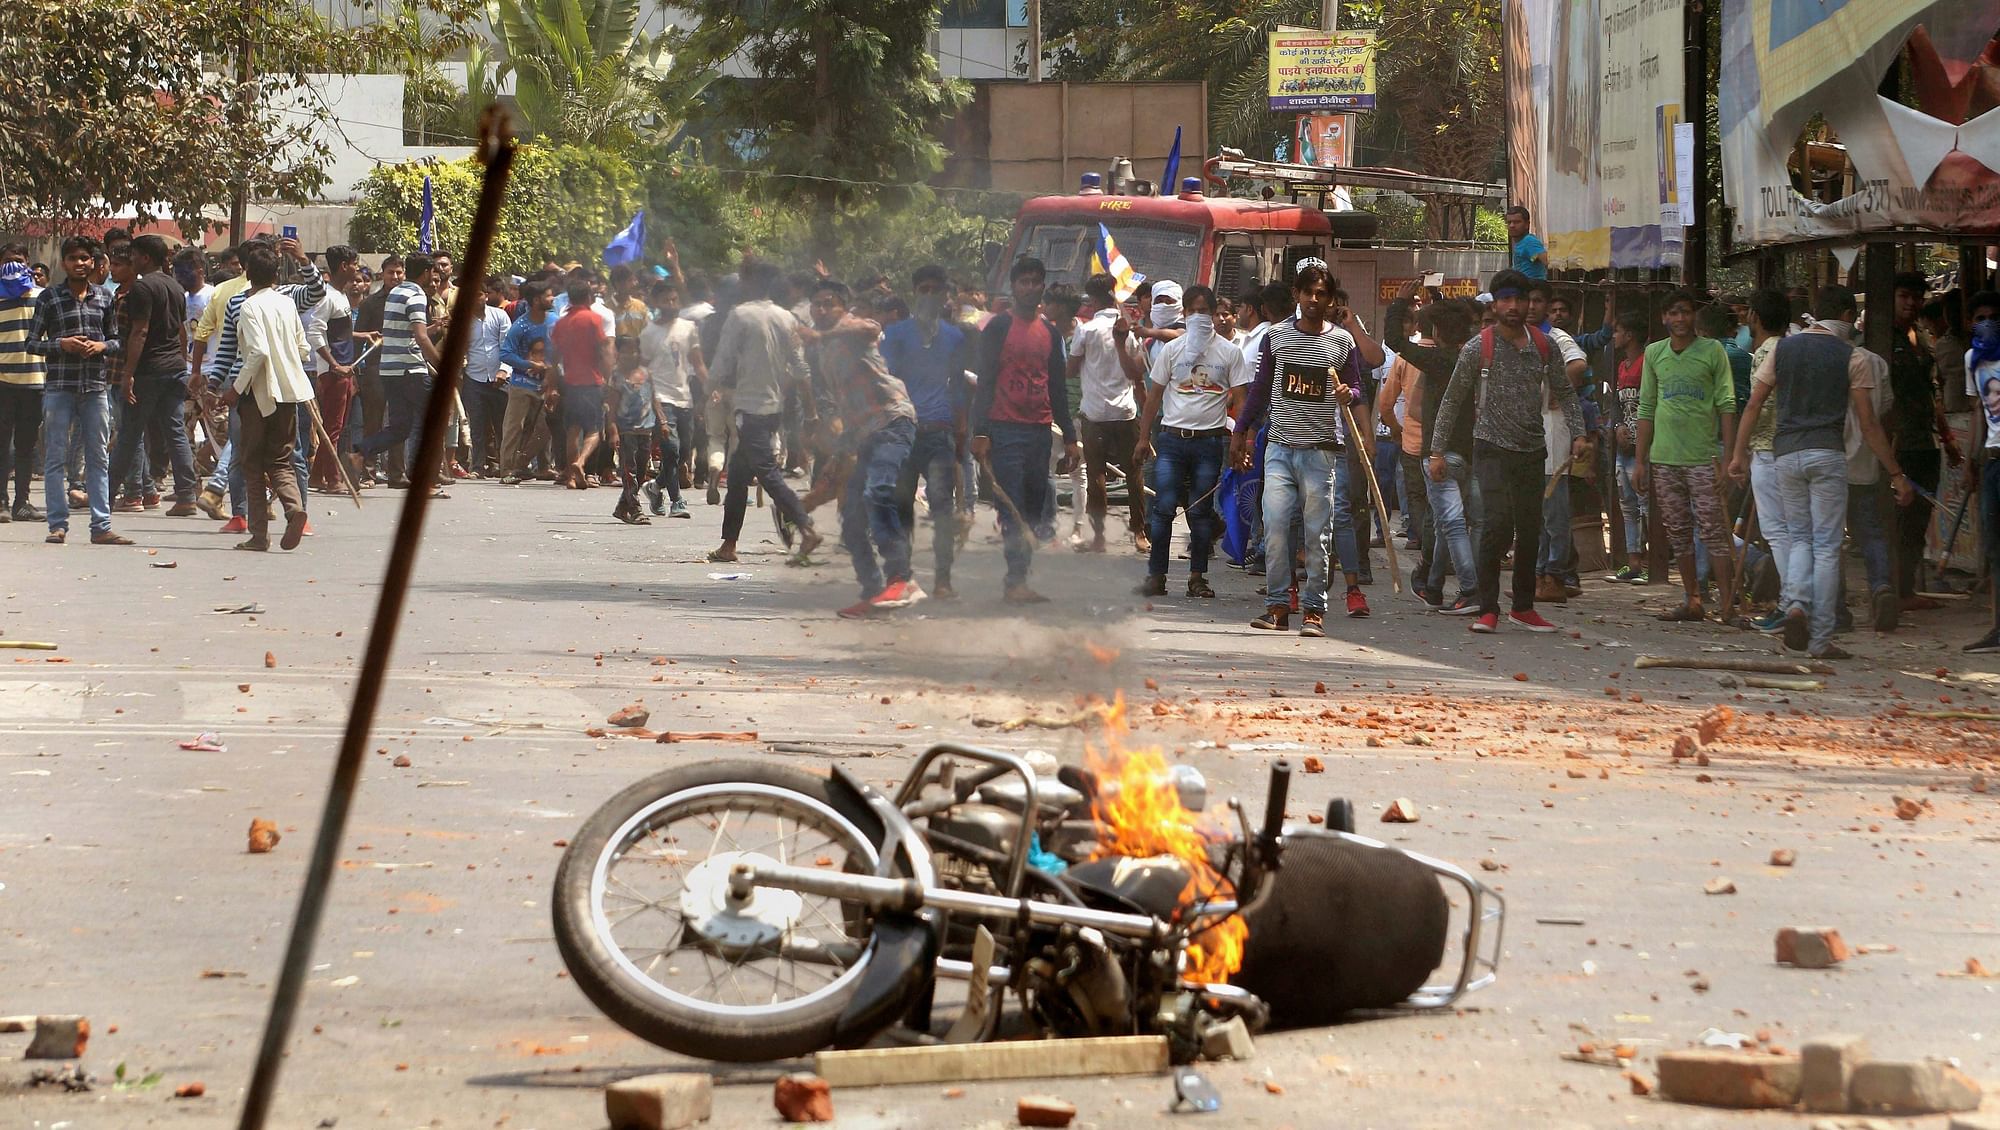 A burned motorcycle in Meerut, UP, a result of Bharat Bandh protests turned violent in the state.